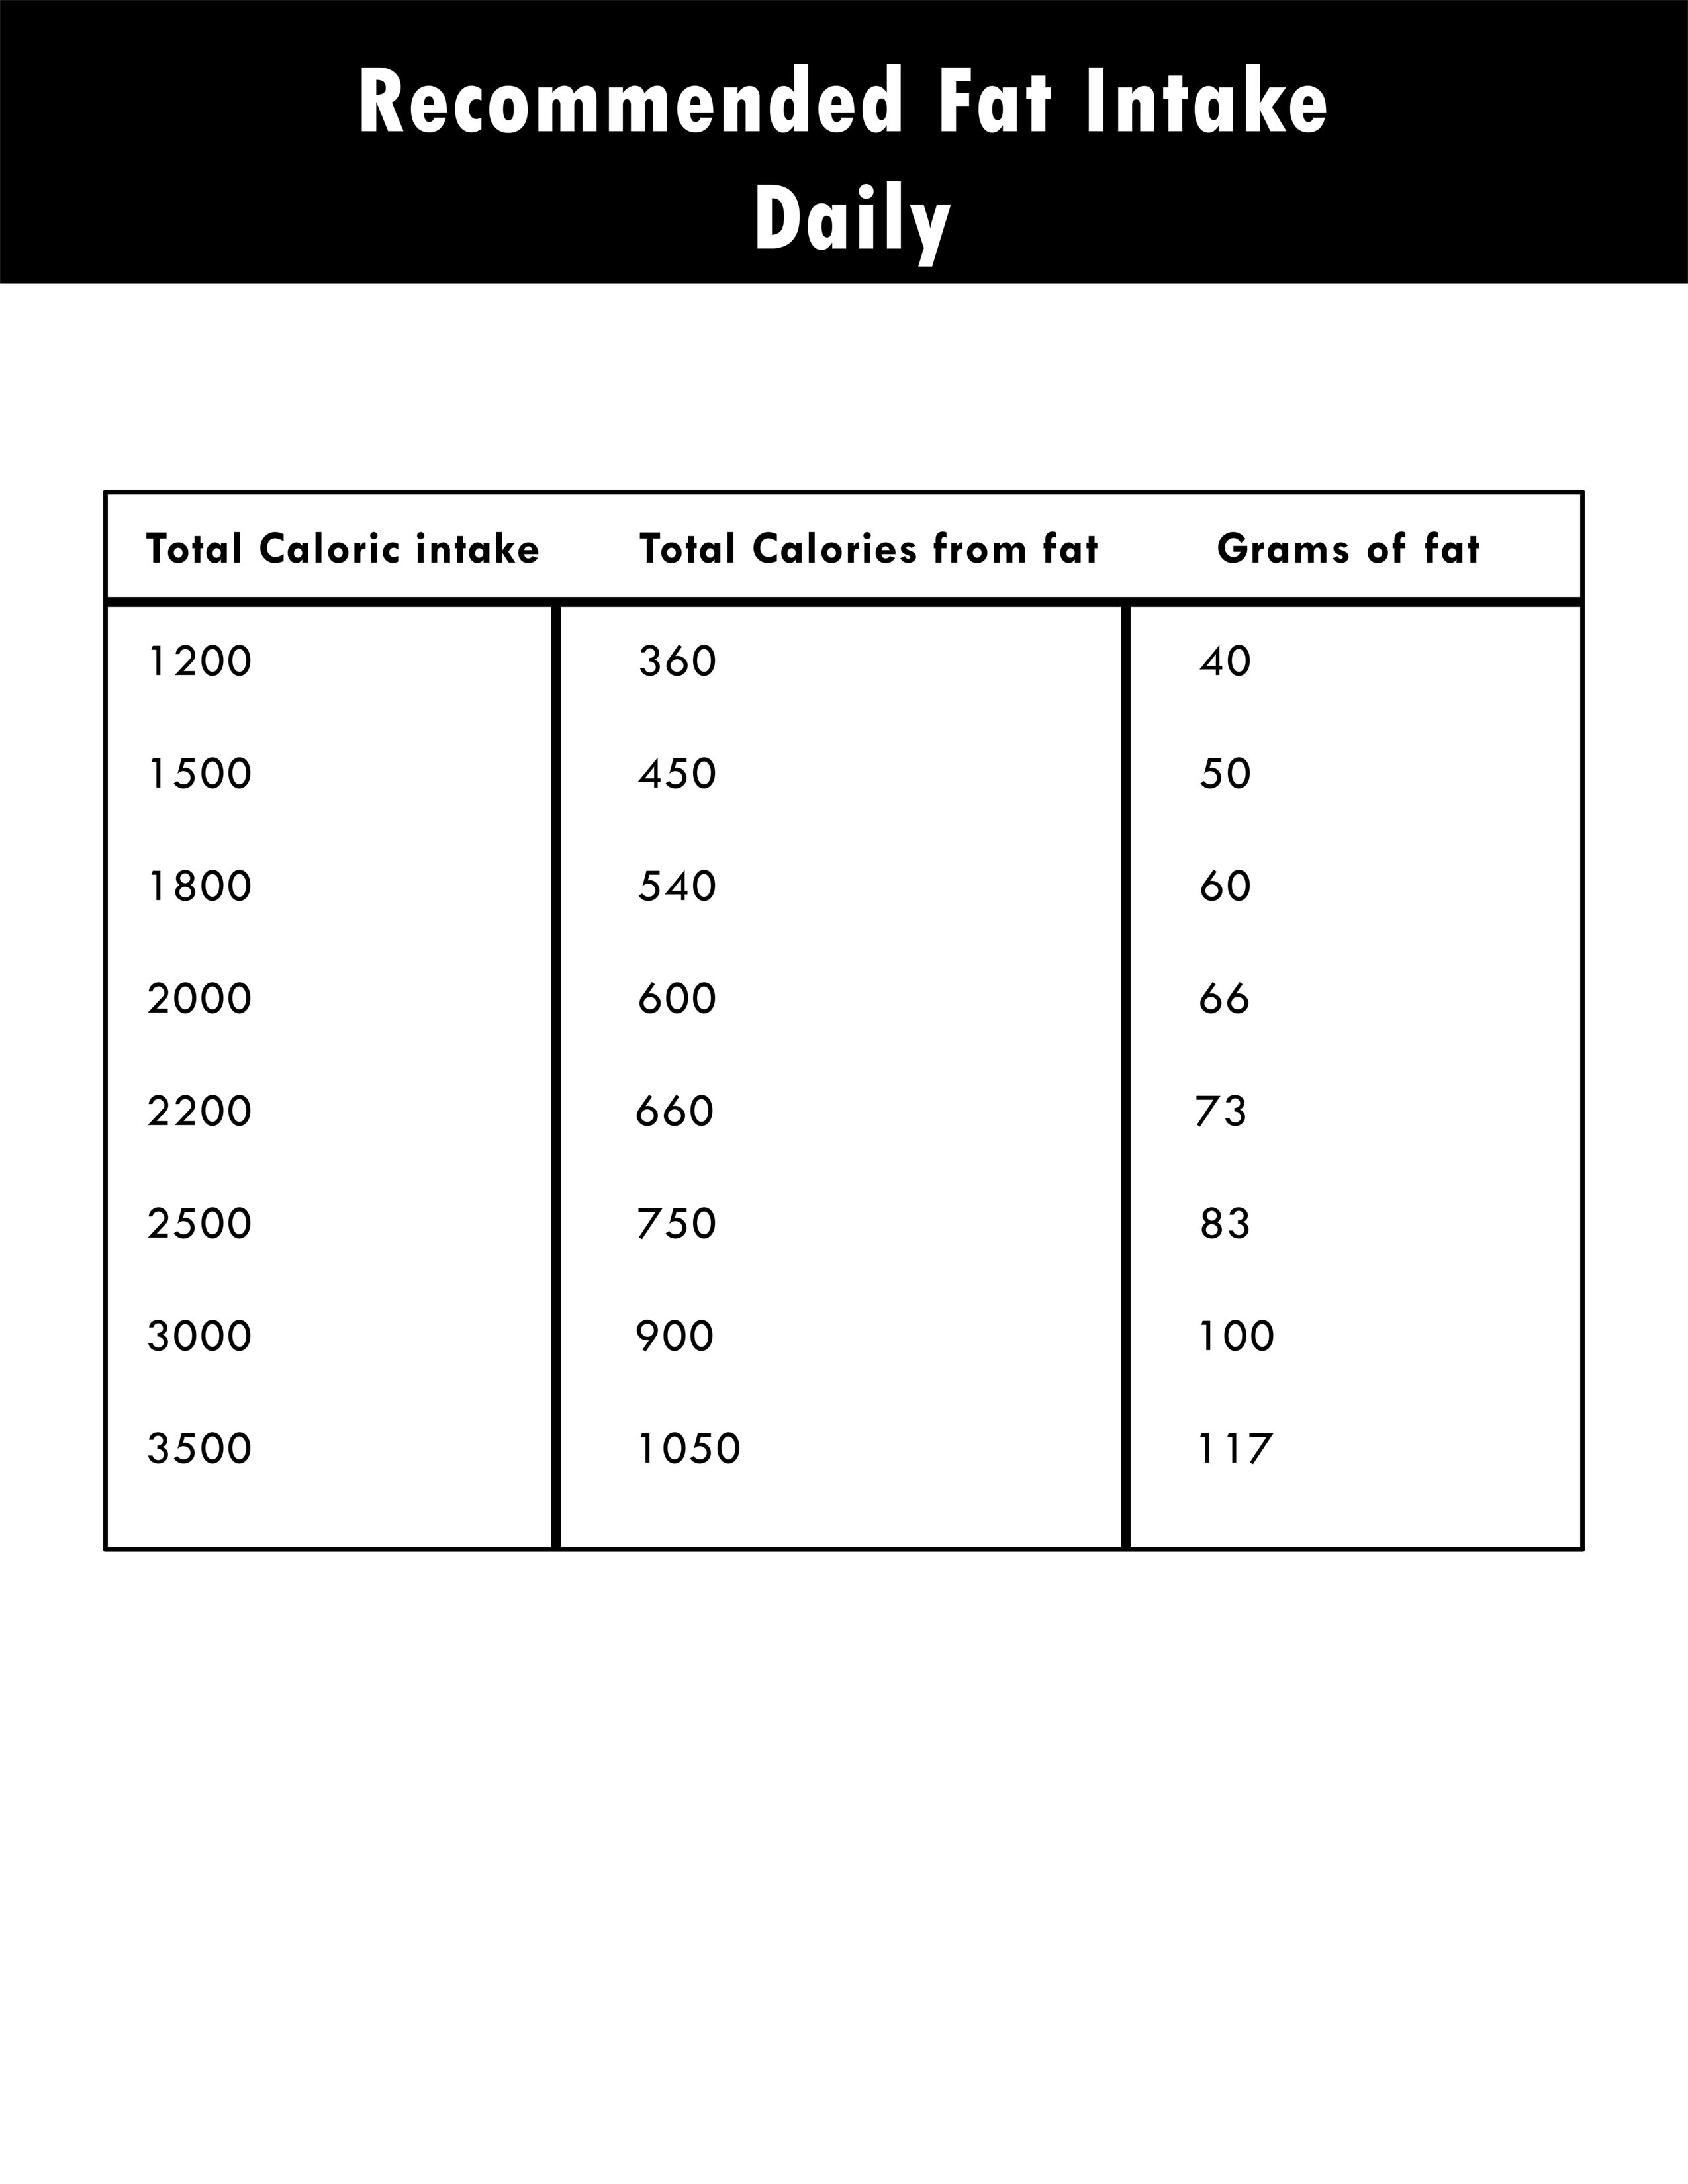 Recommended daily fat intake chart you may download and print.